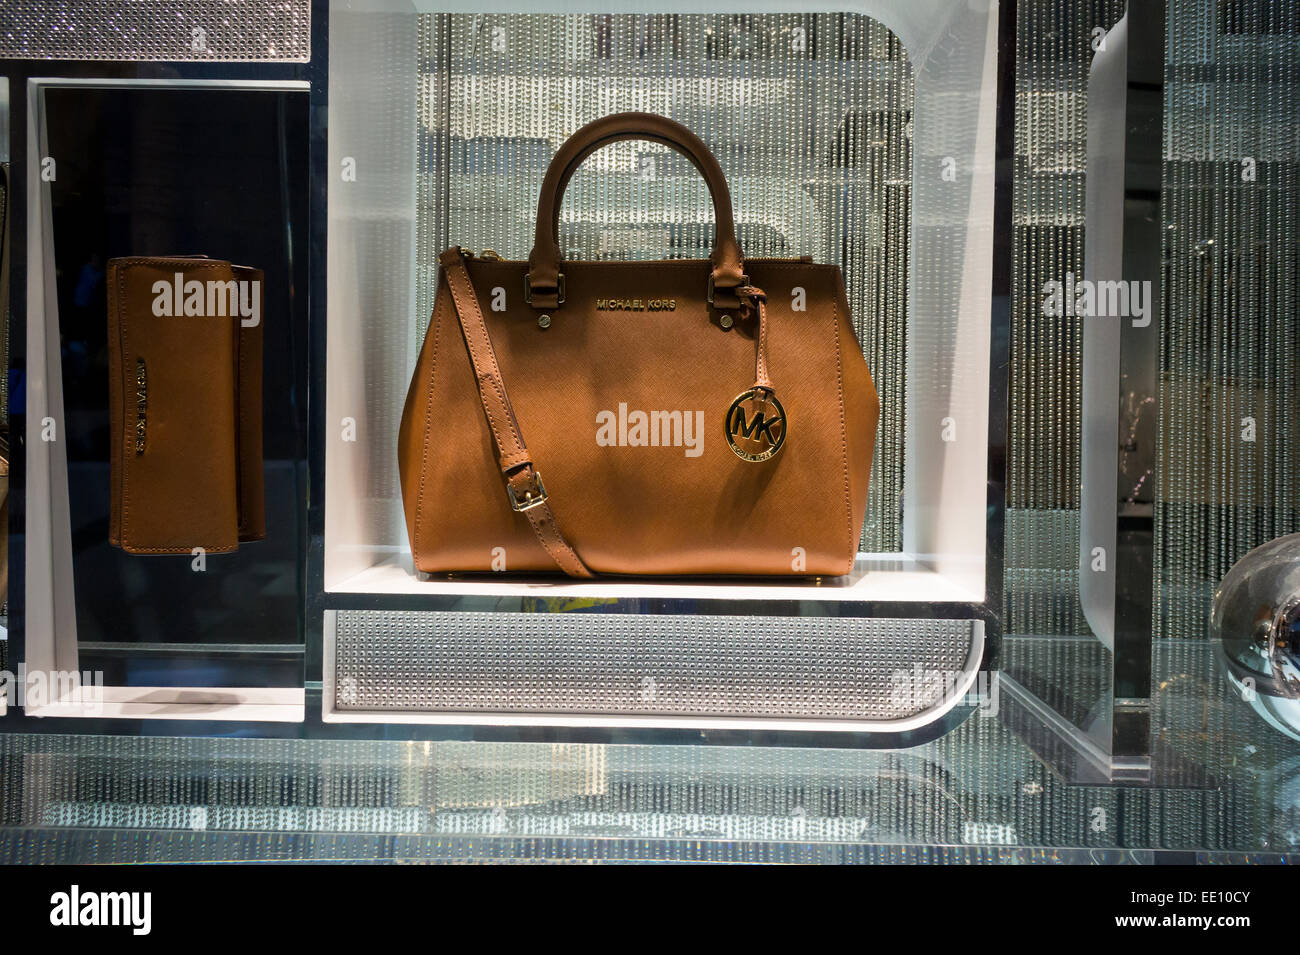 A Michael Kors bag in the window of the brand's store in the Time Warner  Center in New York on Sunday, January 4, 2015. Shares of Michael Kors fell  8.4 percent after